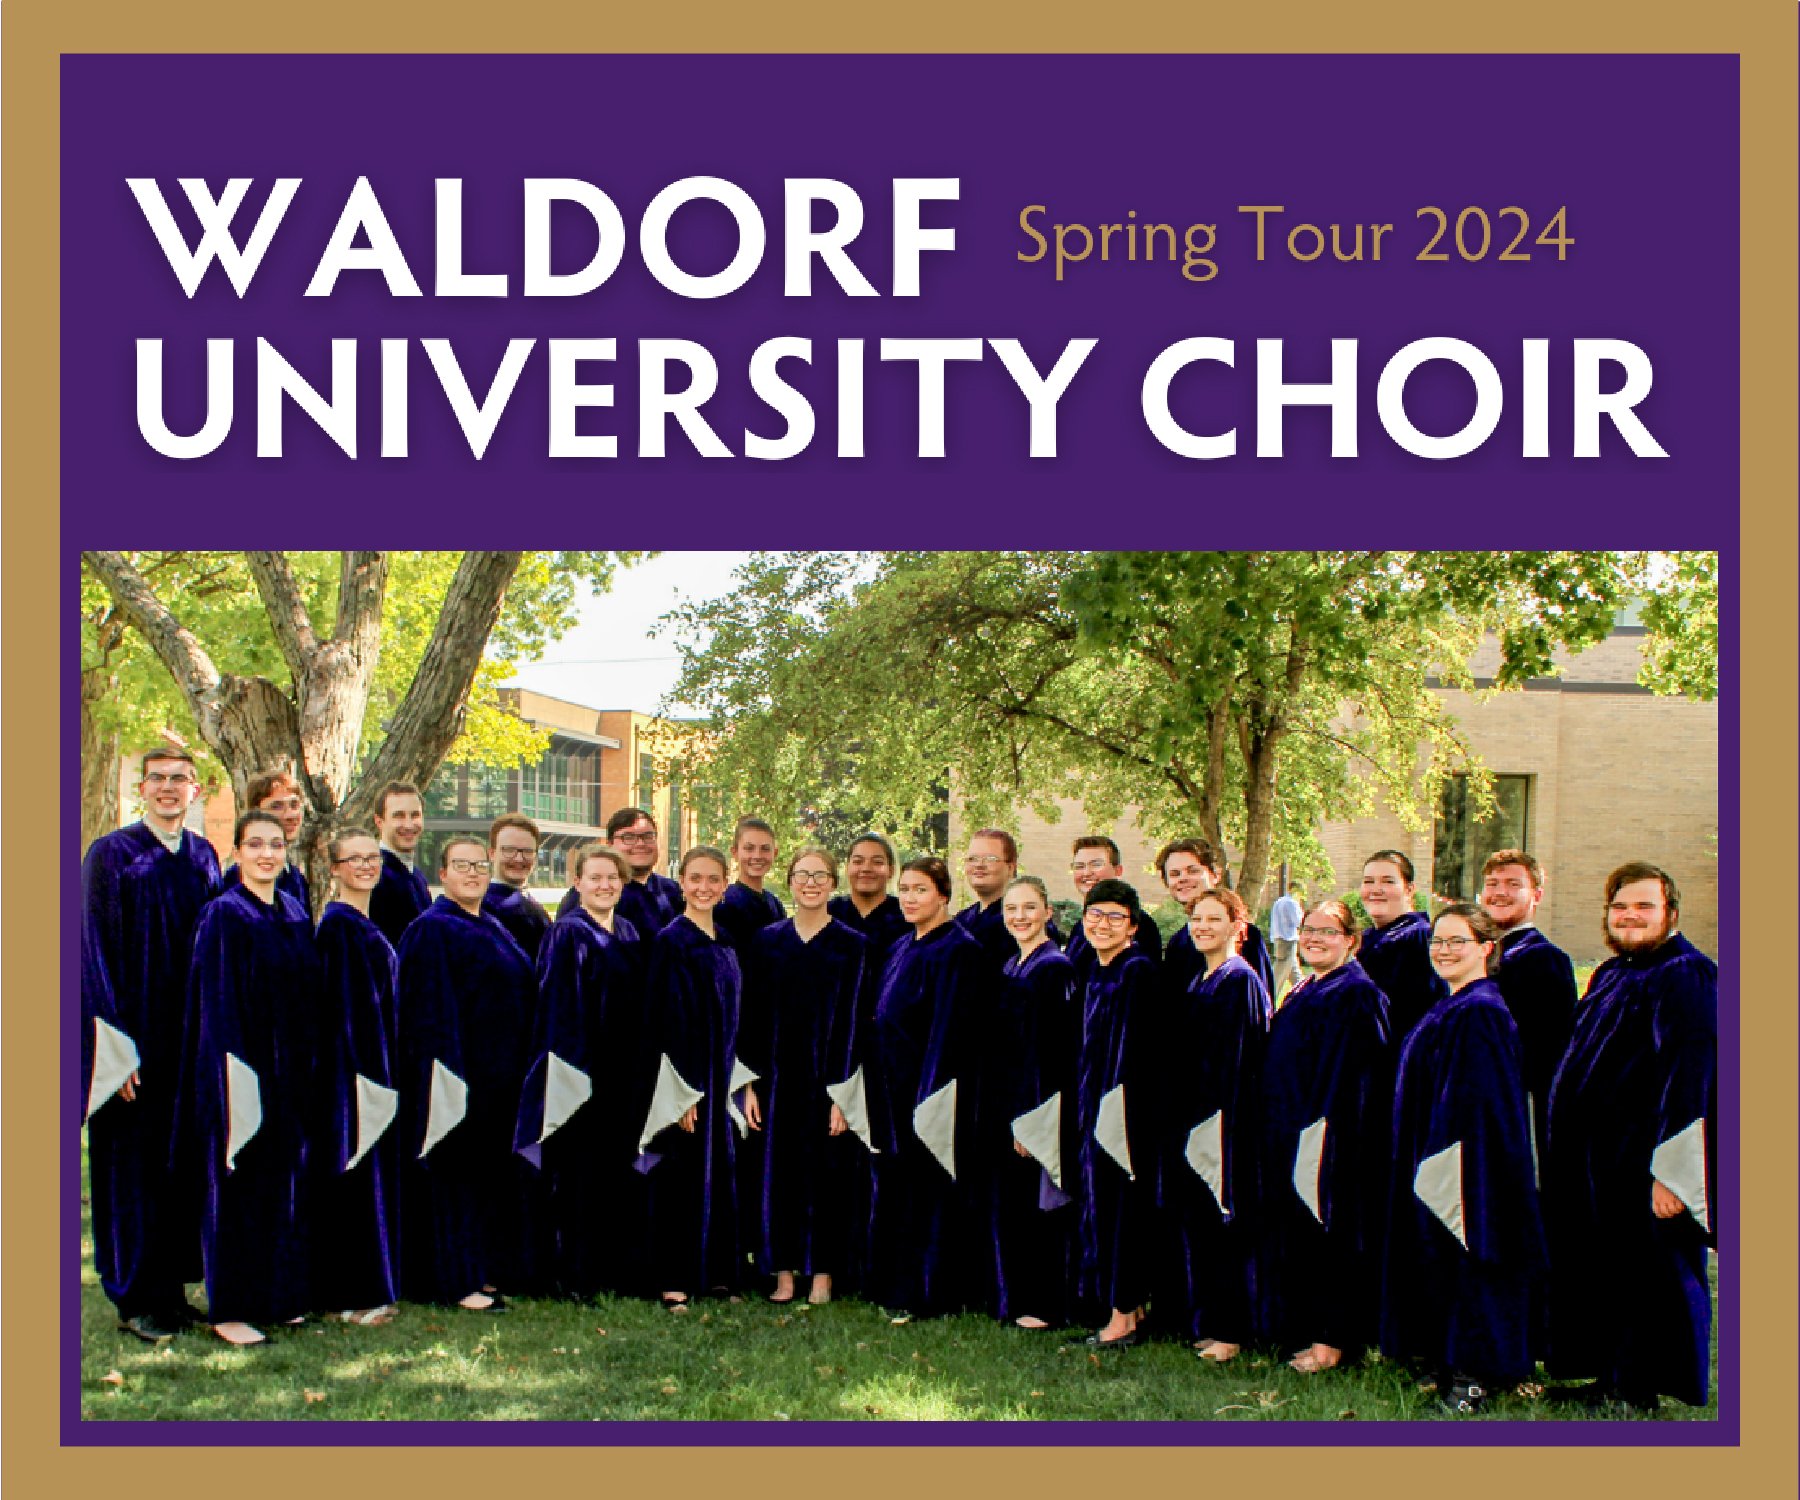 Choir Concert from Waldorf University Choir, during their Spring Tour of 2024! Join the crowd and listen to the amazing vocals. 

 #iowacity #iowa #event #iowaevents #concert #harmony #music #midwestliving #choir #choirlife #choirmusic #universitylif